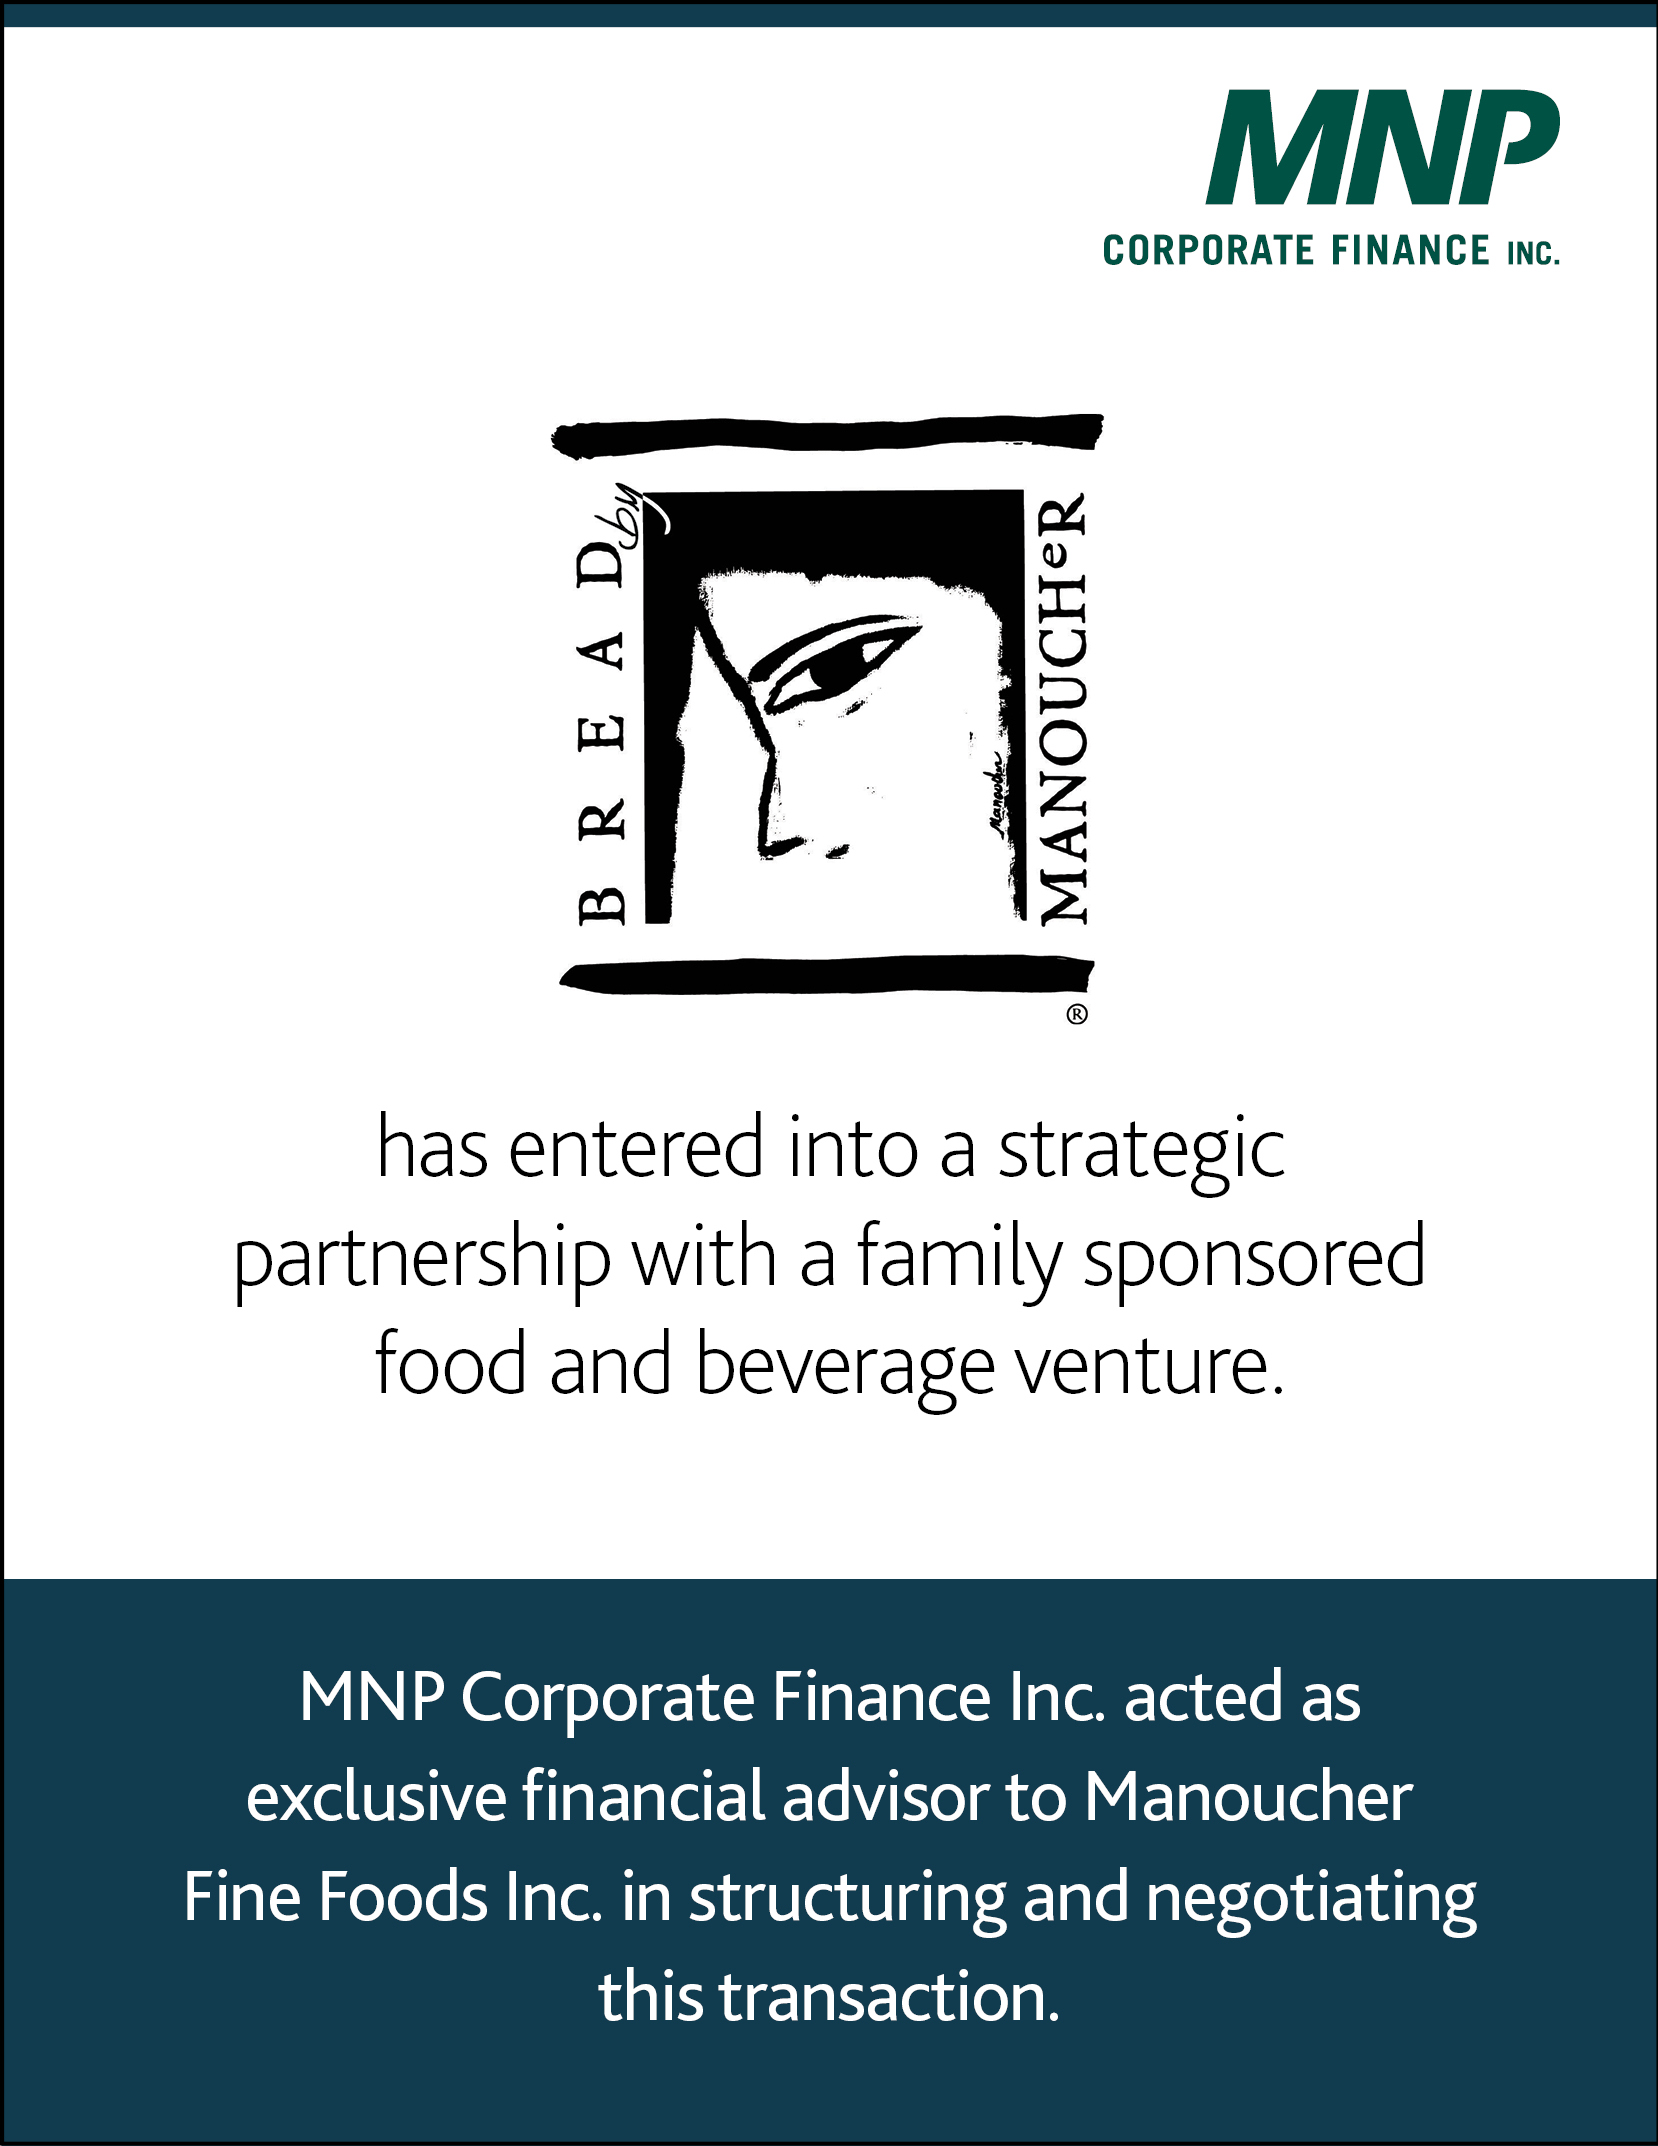 Manoucher Fine Foods Inc. has entered into a strategic partnership with a family sponsored food and beverage venture.